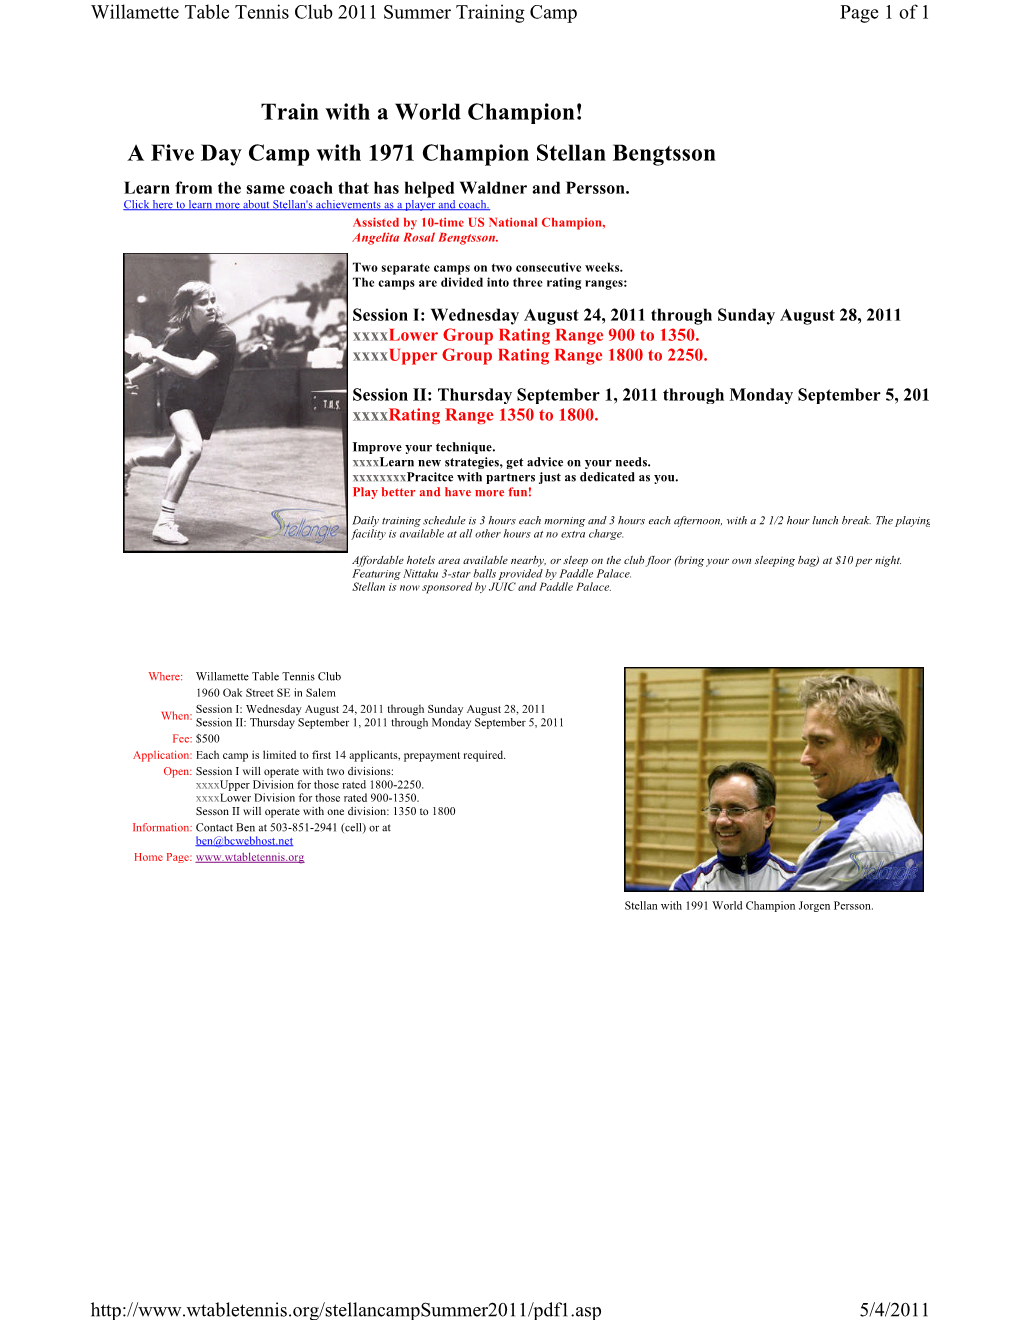 Train with a World Champion! a Five Day Camp with 1971 Champion Stellan Bengtsson Learn from the Same Coach That Has Helped Waldner and Persson